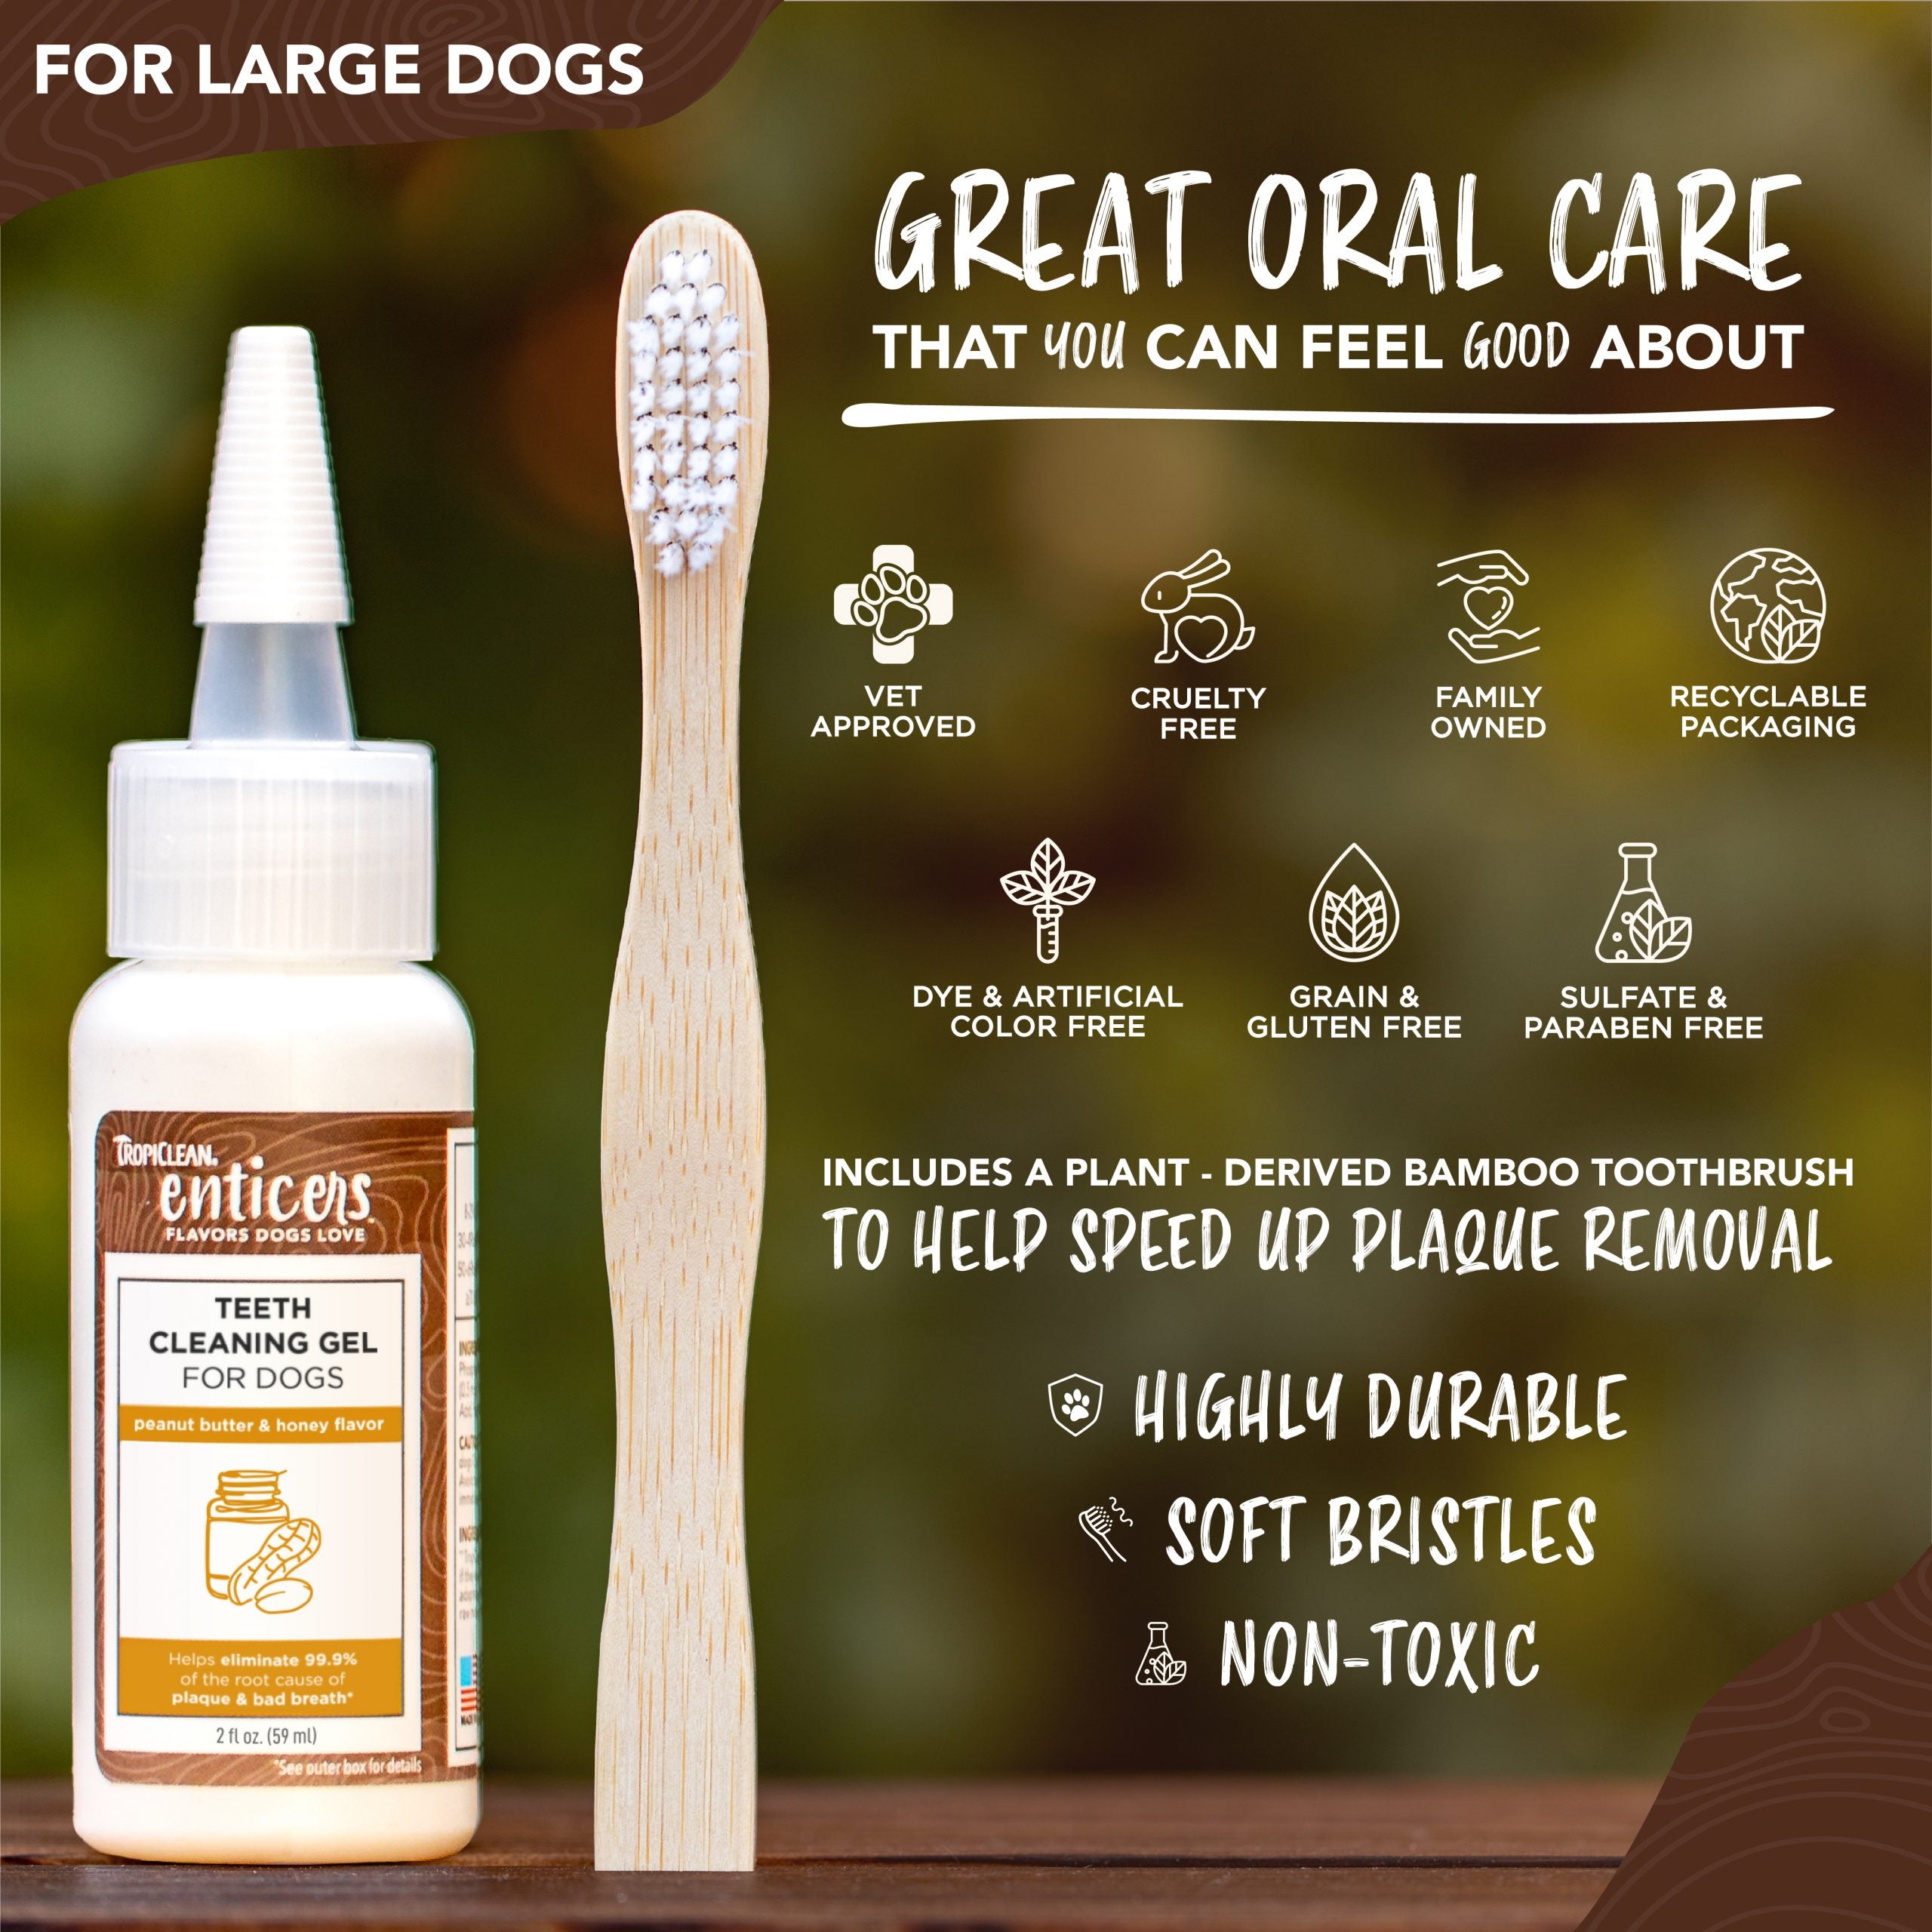 TropiClean Enticers Teeth Cleaning Gel and Toothbrush for Large Dogs Peanut Butter & Honey Gel 59ml